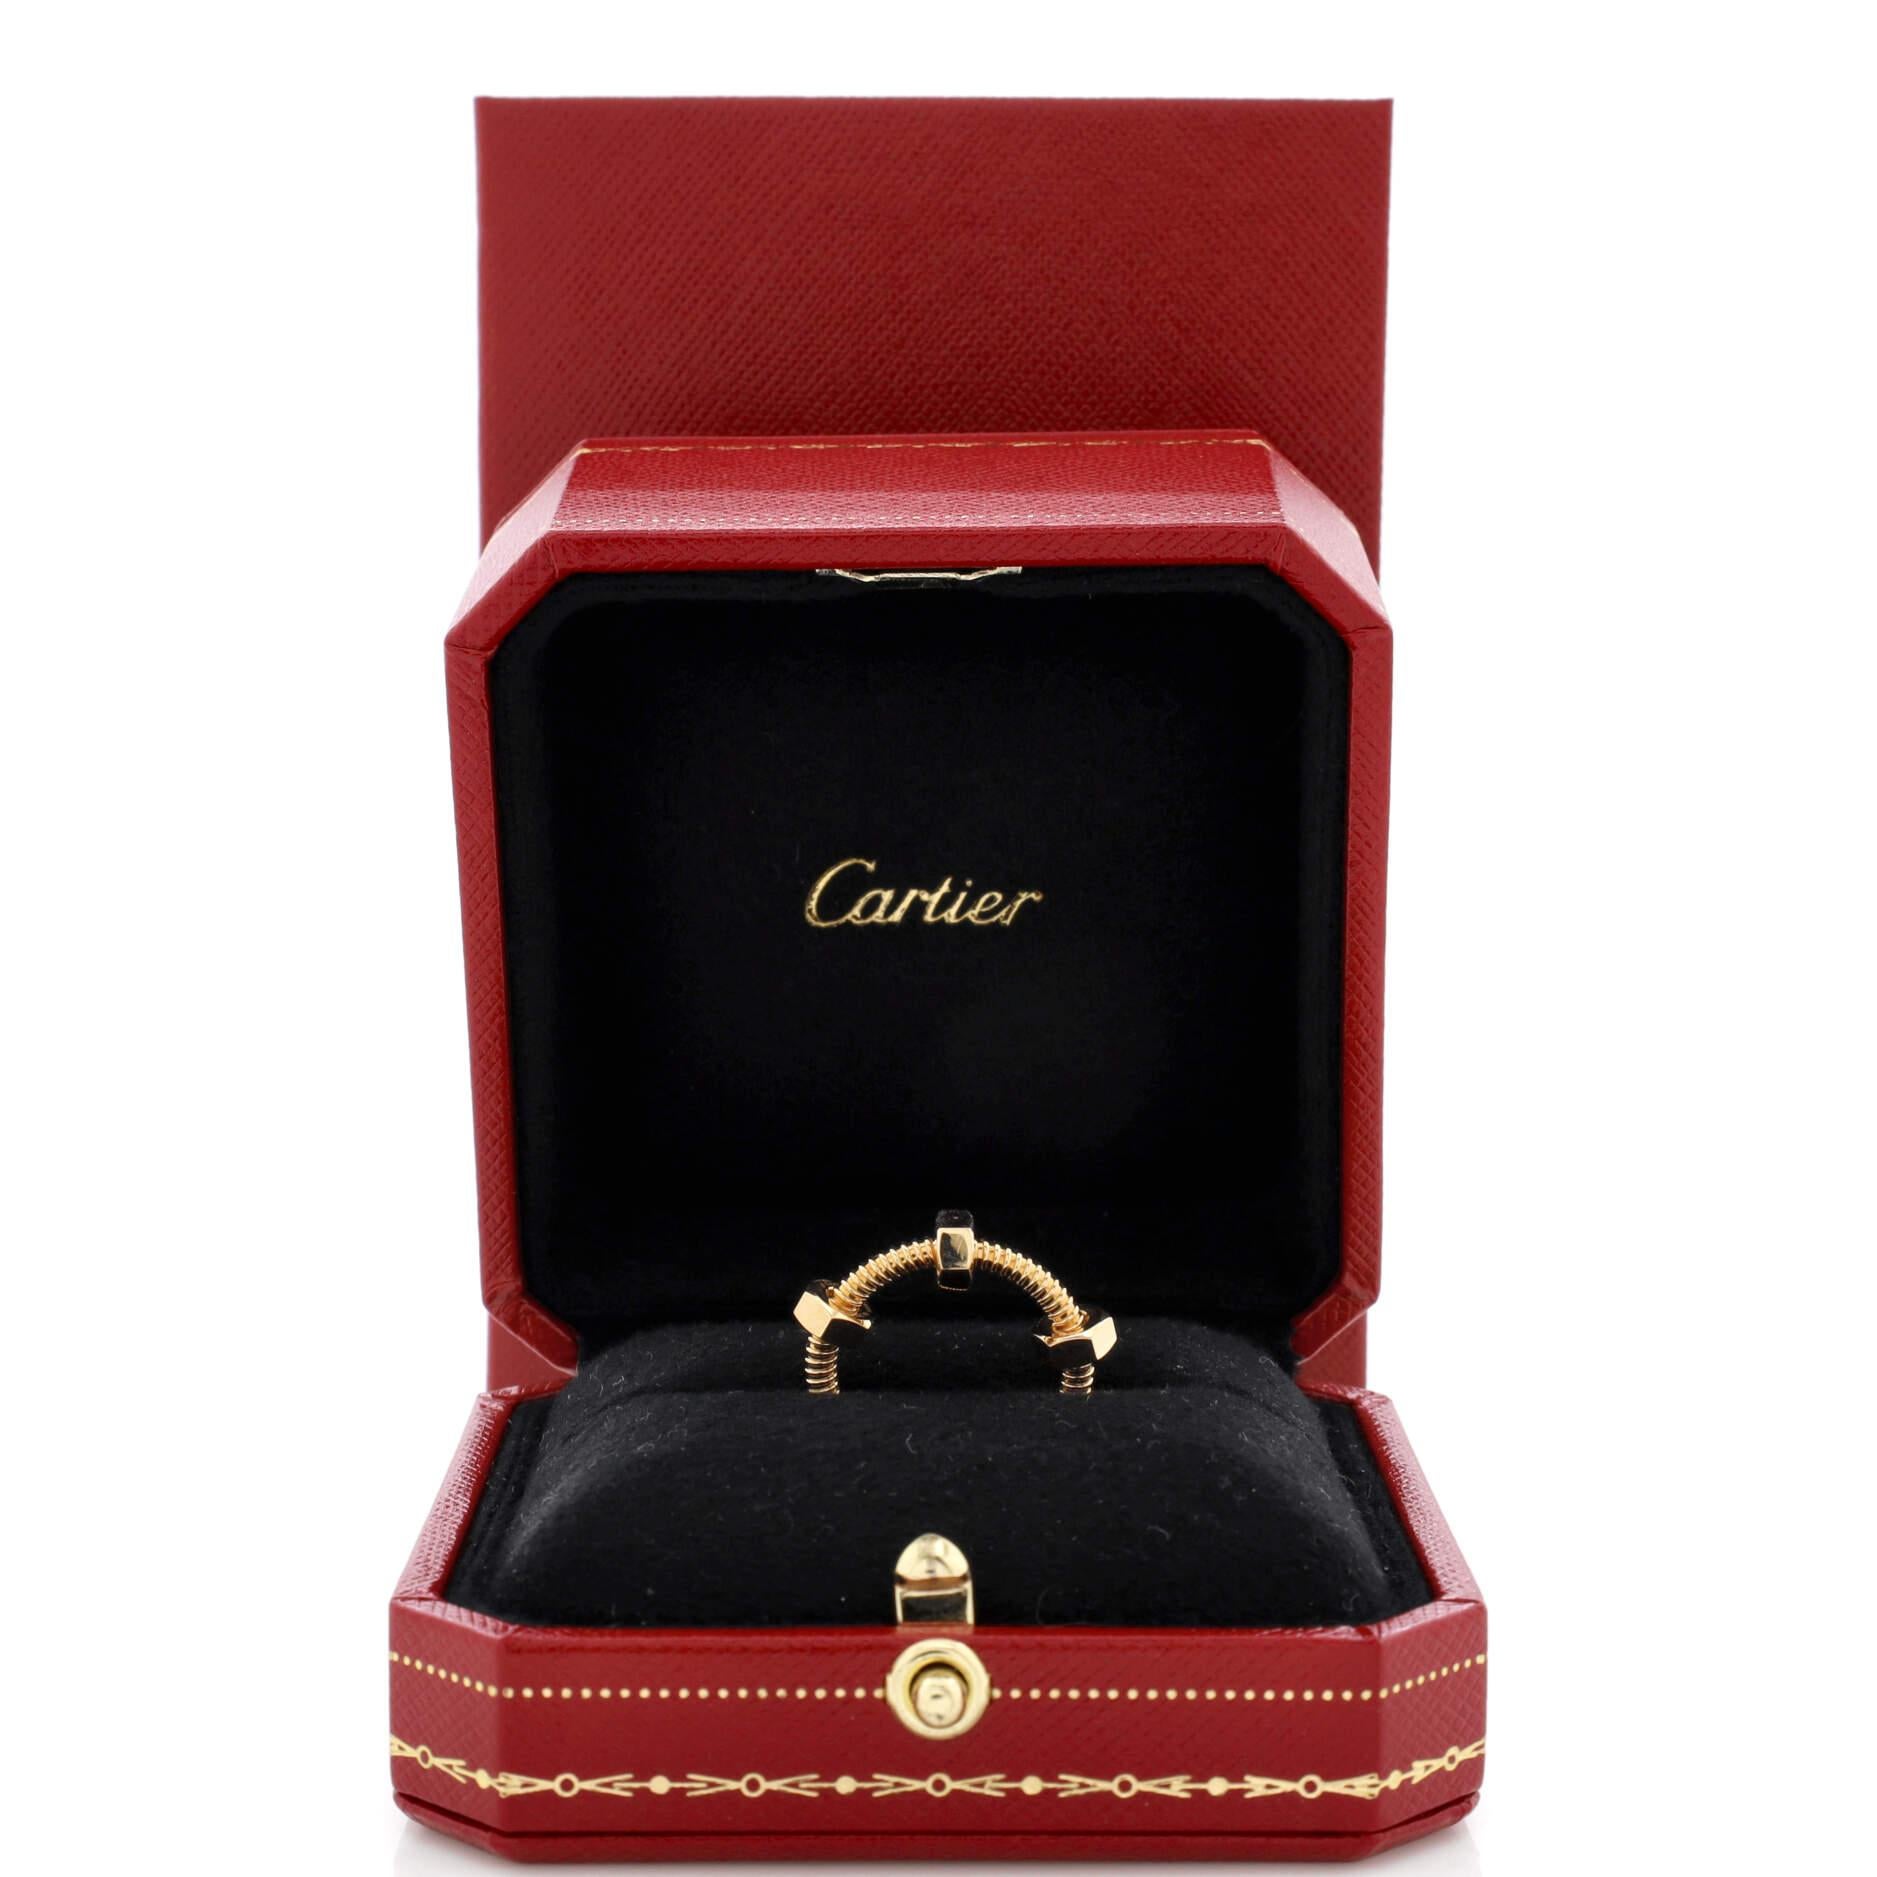 Condition: Great. Minor wear throughout.
Accessories:
Measurements: Size: 4.75 - 49, Width: 2.5 mm
Designer: Cartier
Model: Ecrou de Cartier Ring 18K Yellow Gold
Exterior Color: Yellow Gold
Item Number: 224637/5